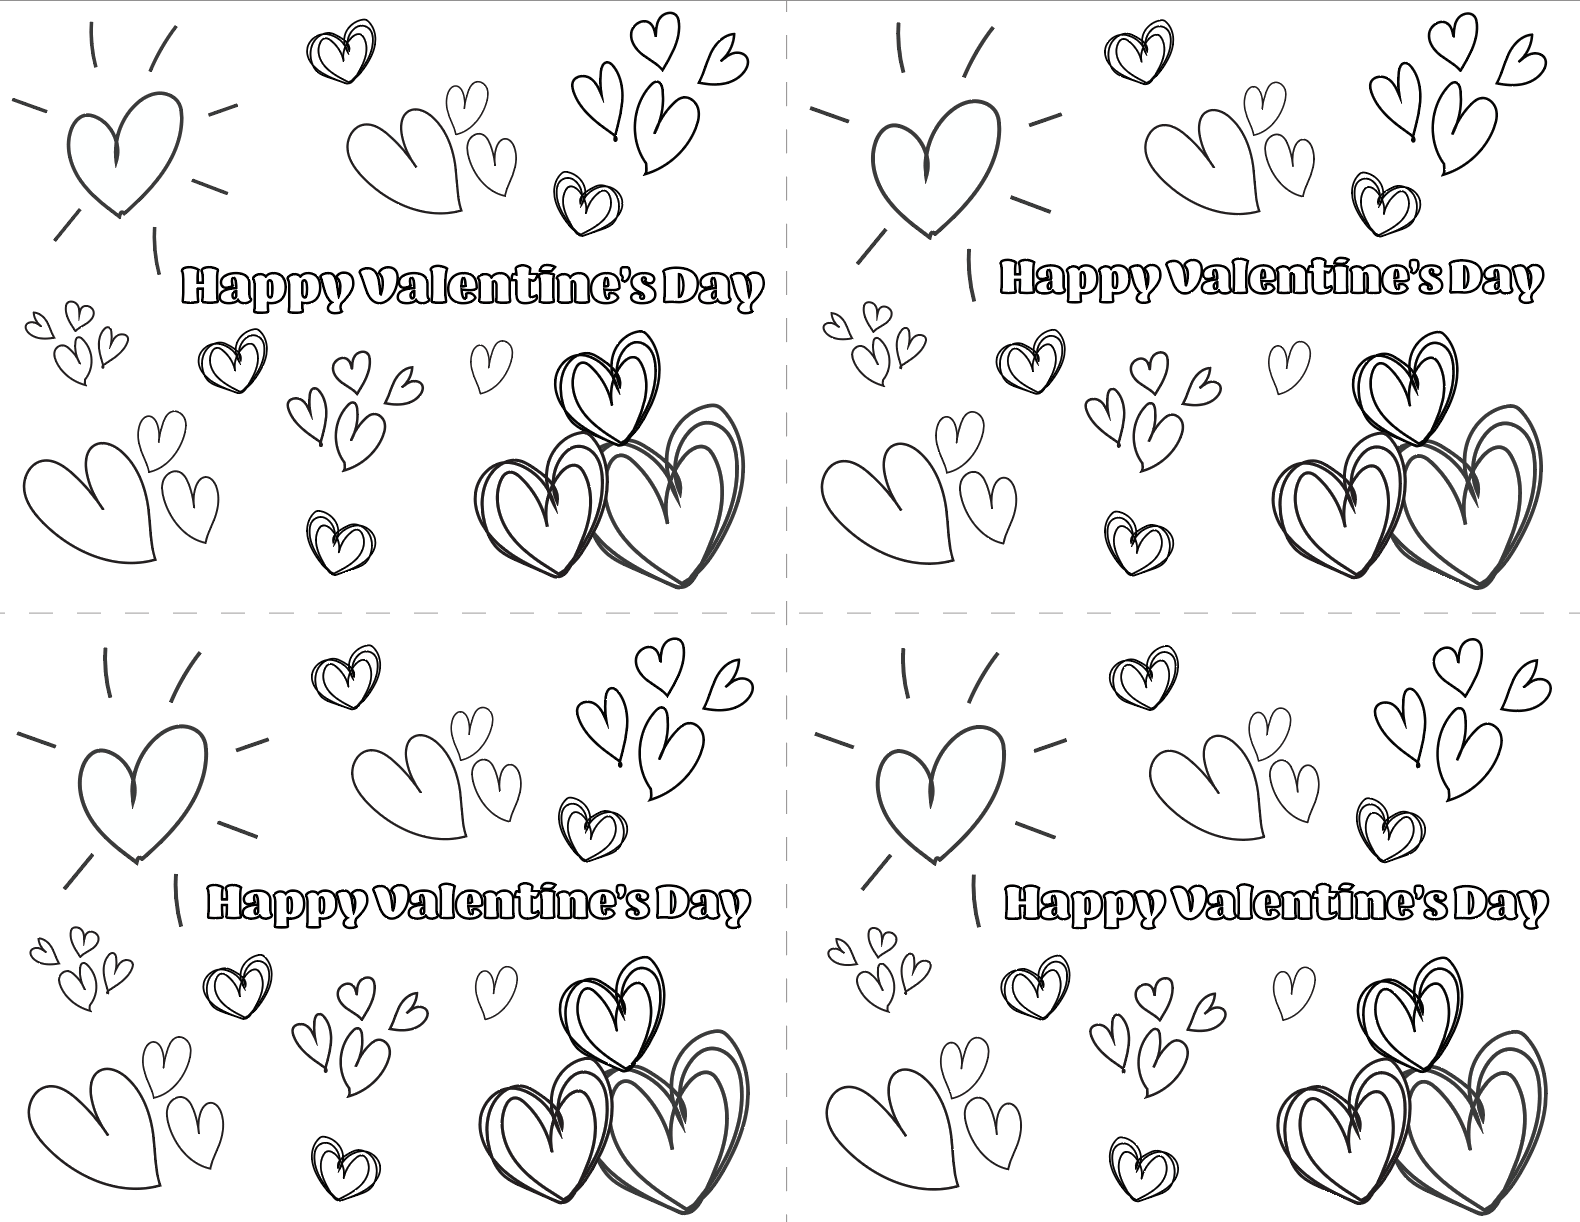 Color-In Valentine's Card Download - With Love Paperie